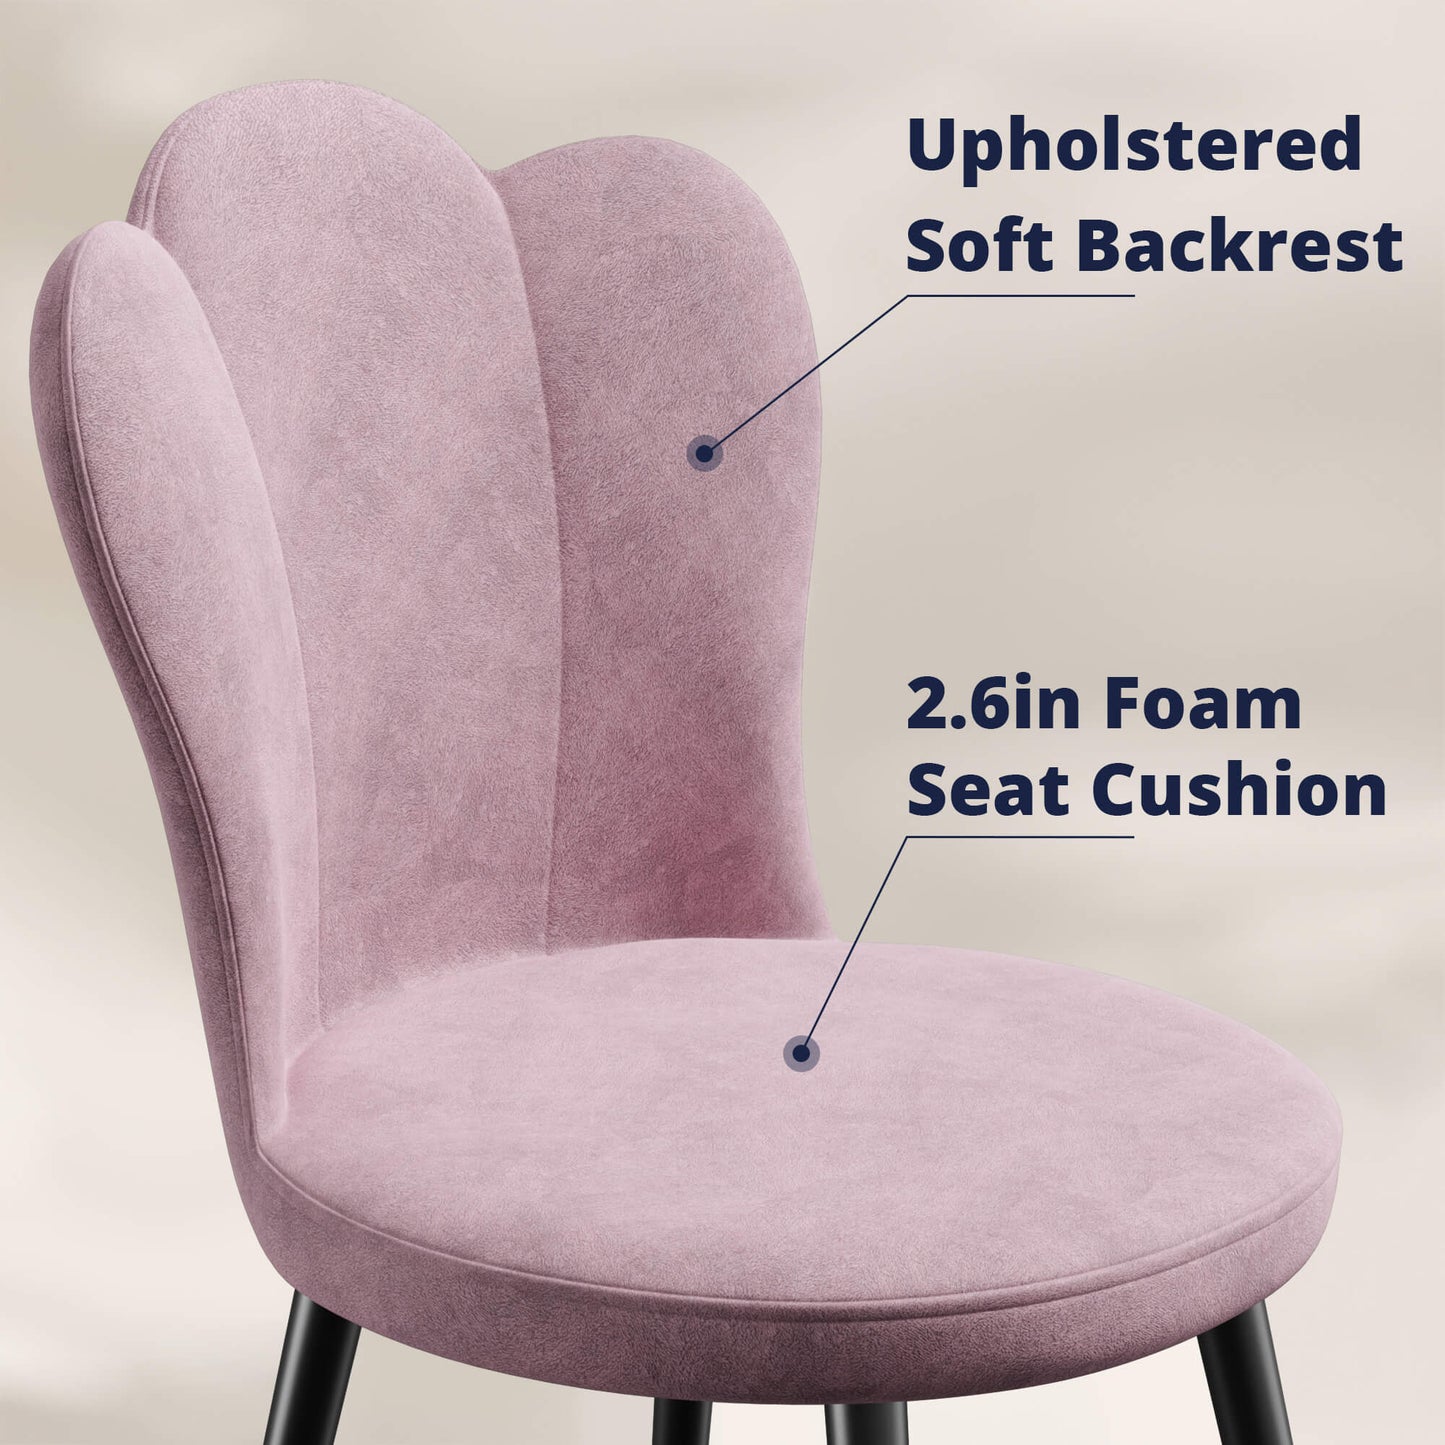 Kitchen & Dining Room Chairs, Upholstered Dining Chairs, Velvet Kitchen Chairs Set of 2, Dusty Pink